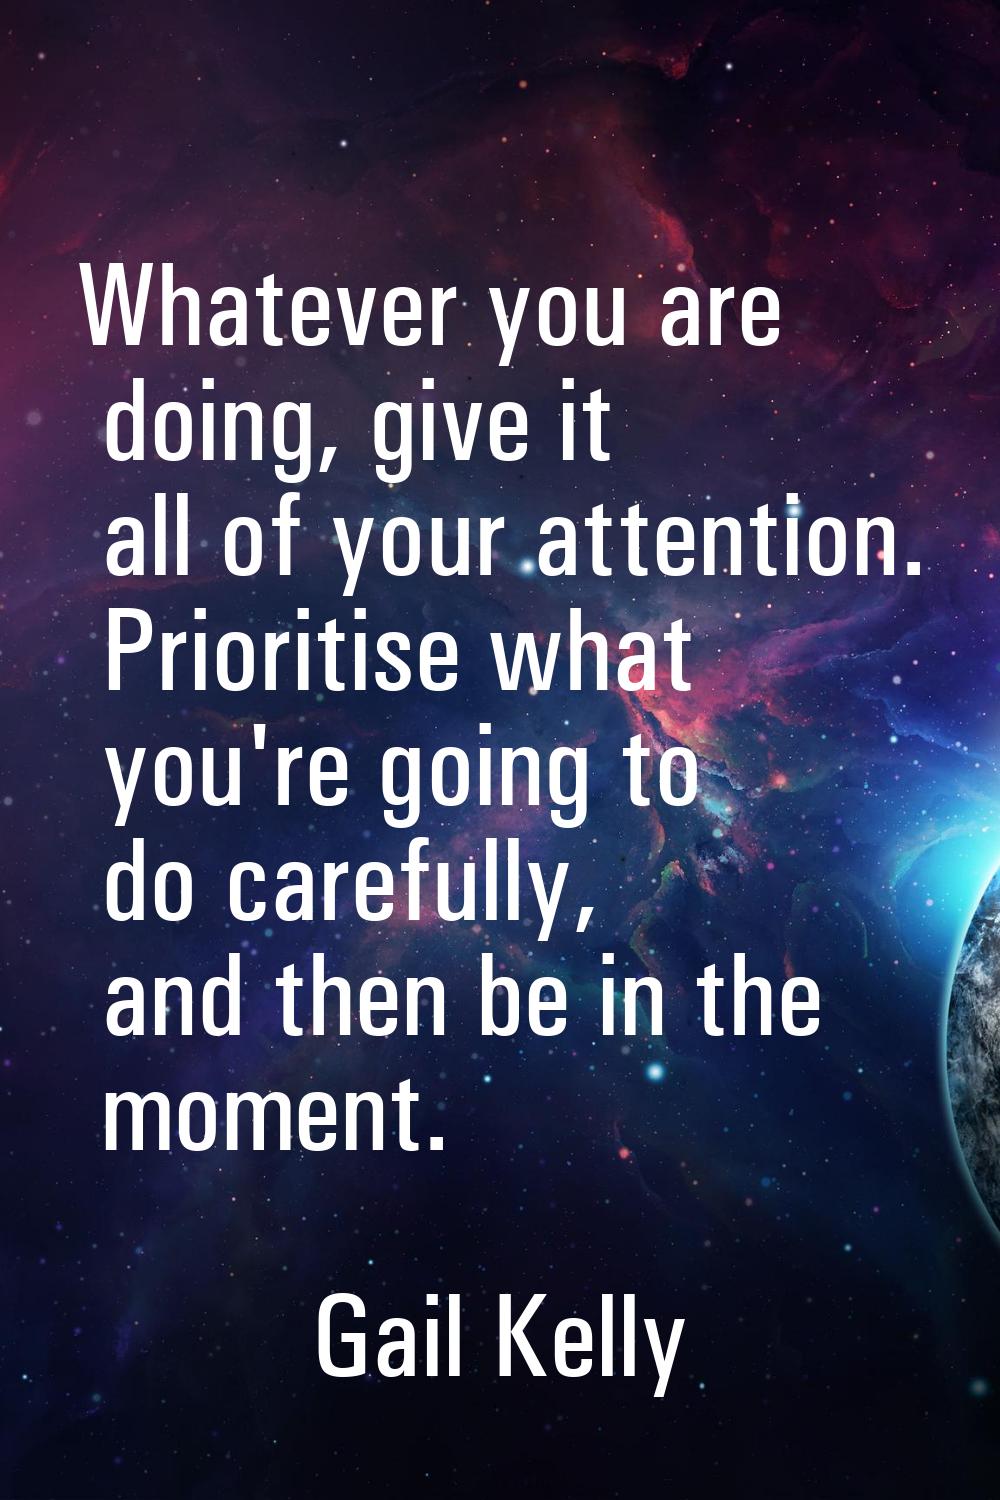 Whatever you are doing, give it all of your attention. Prioritise what you're going to do carefully